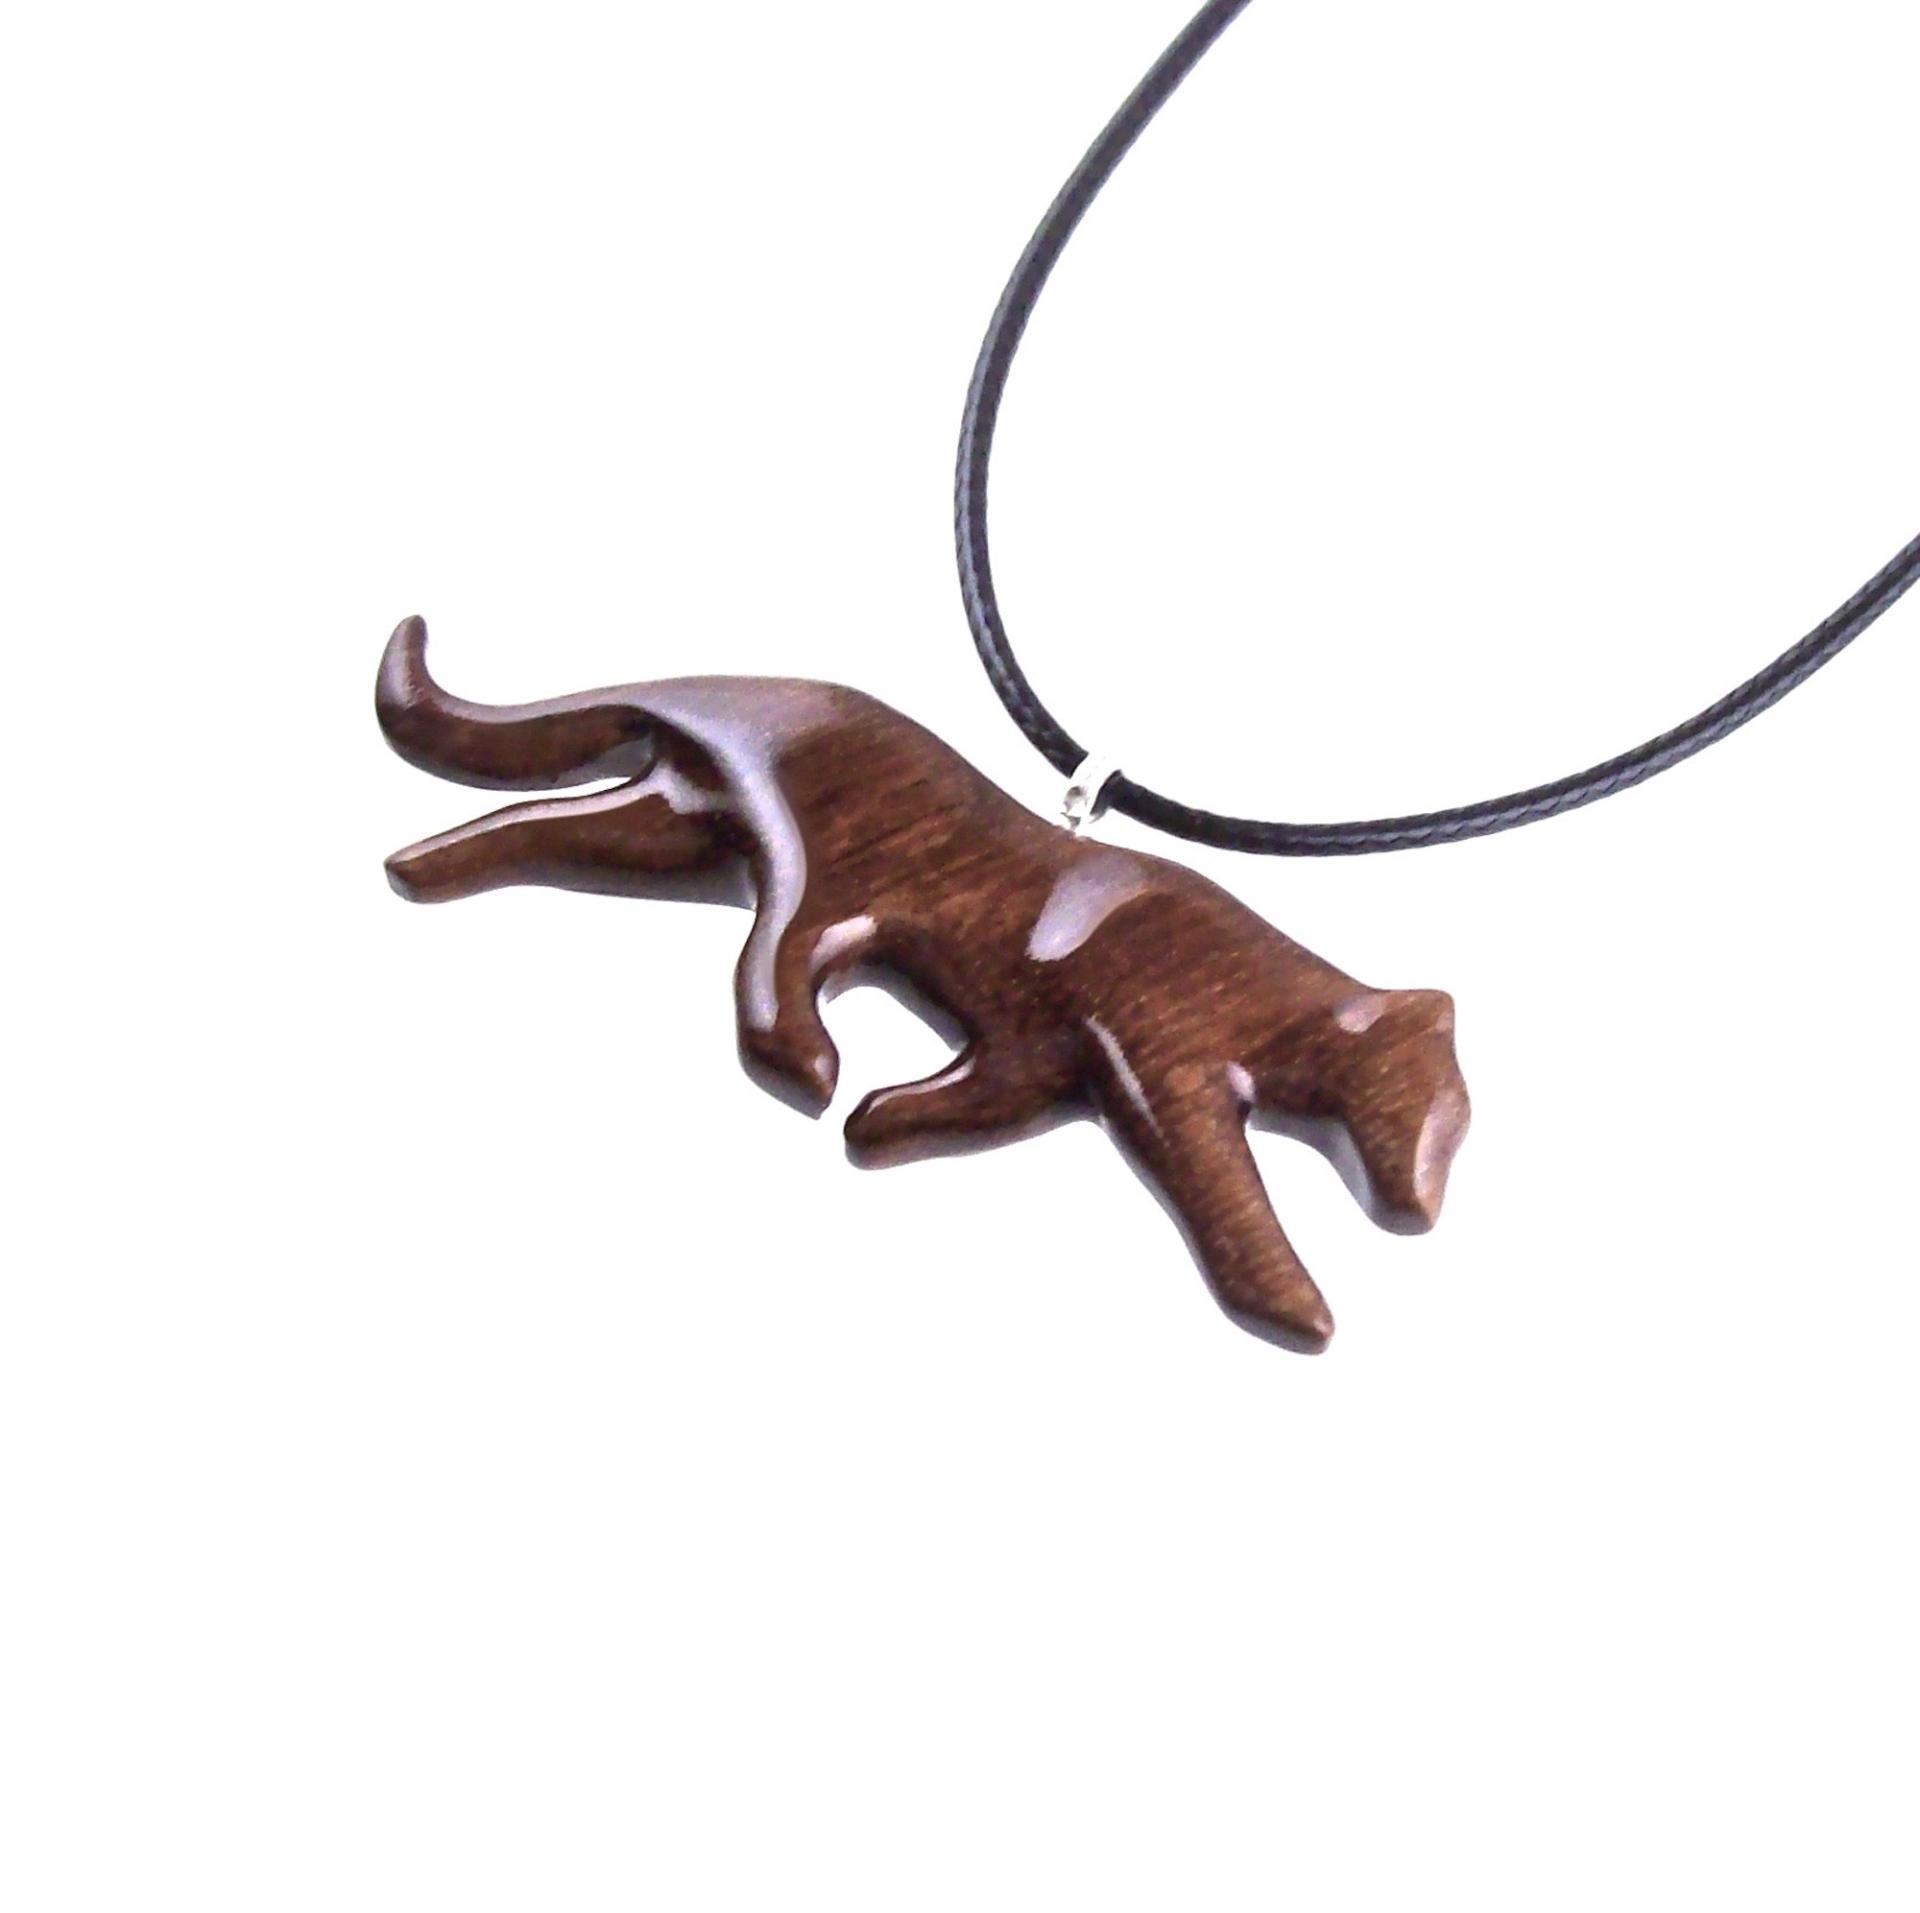 Jaguar Pendant, Hand Carved Wooden Panther Necklace, Cougar, Mountain Lion, Animal Jewelry for Men or Women, Gift for Him Her